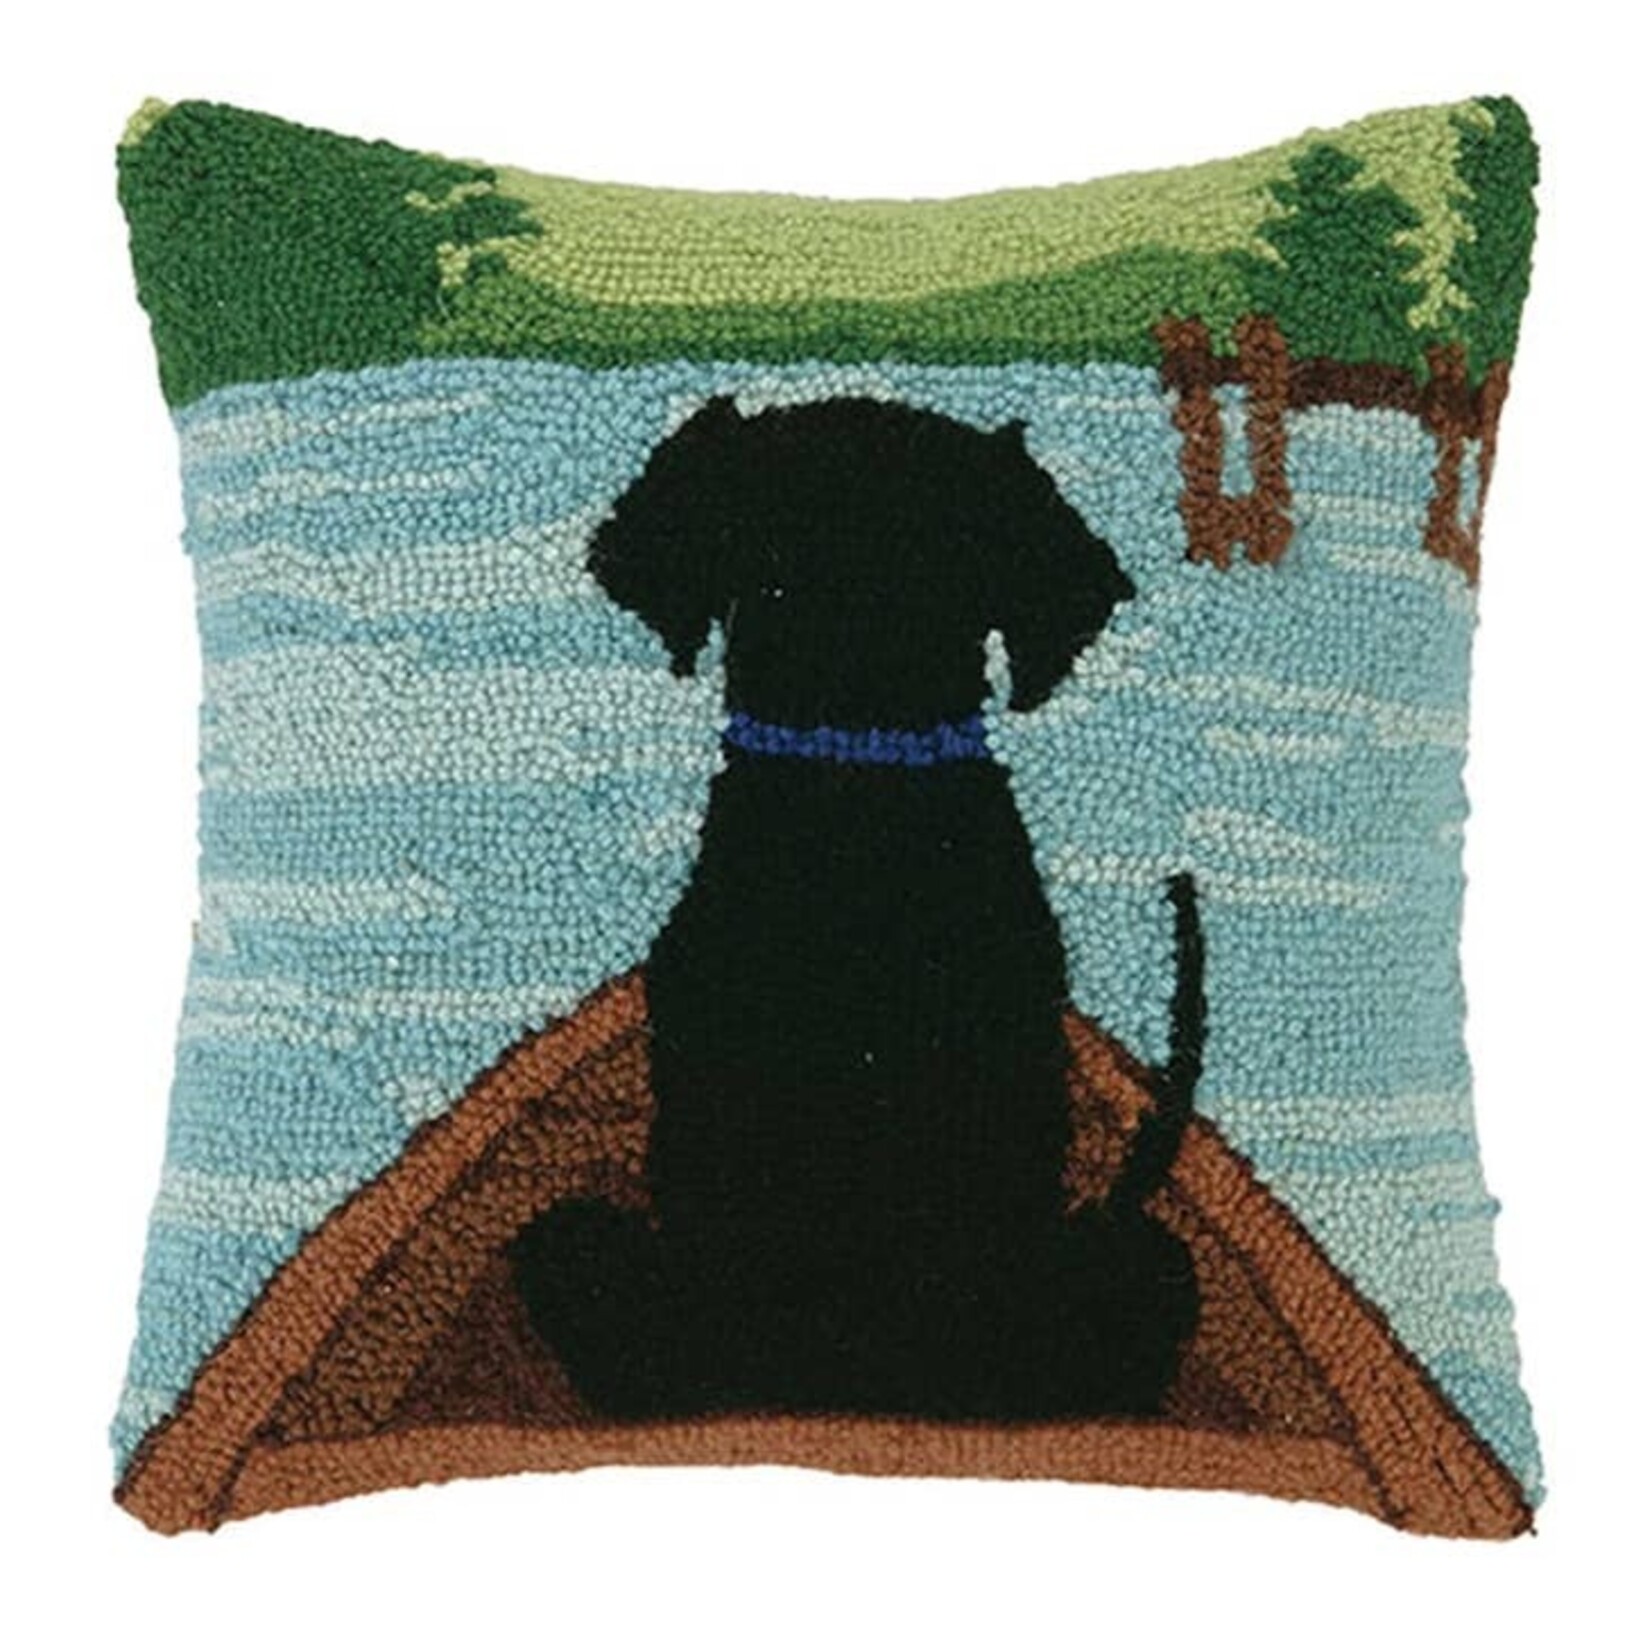 Pillows - Hooked Black Dog In Canoe Pillow